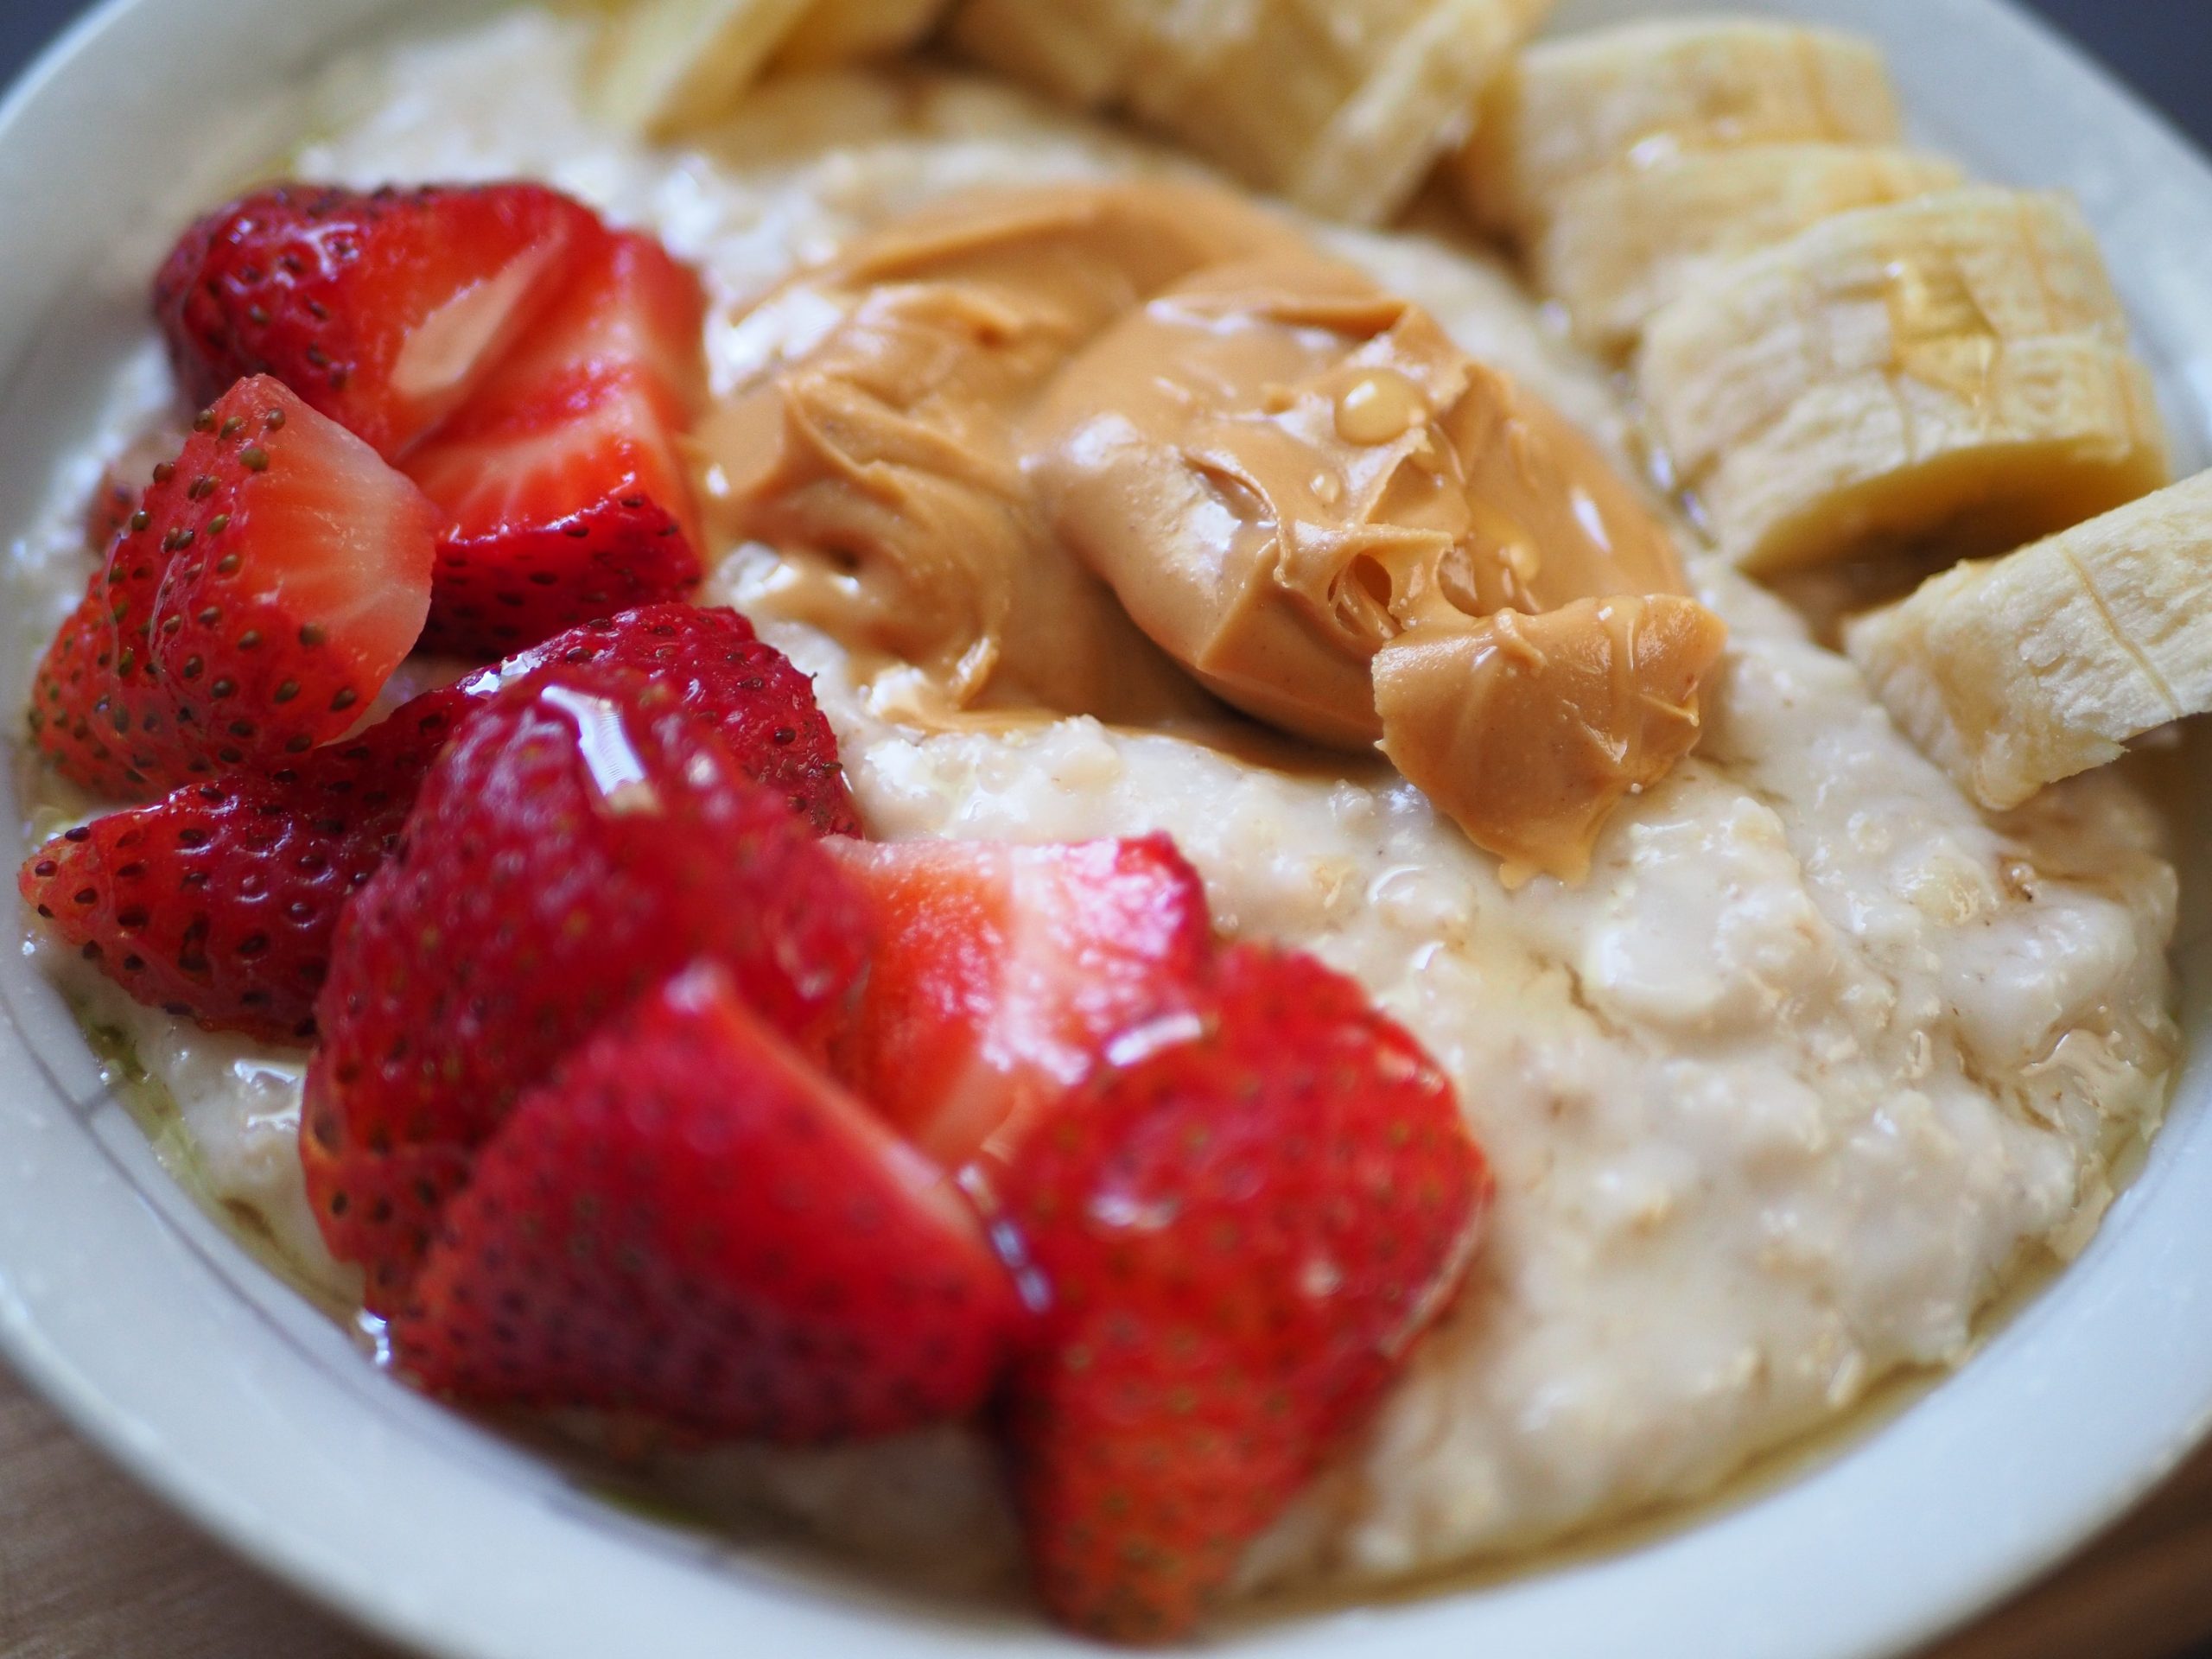 Oatmeal with strawberries and peanut butter